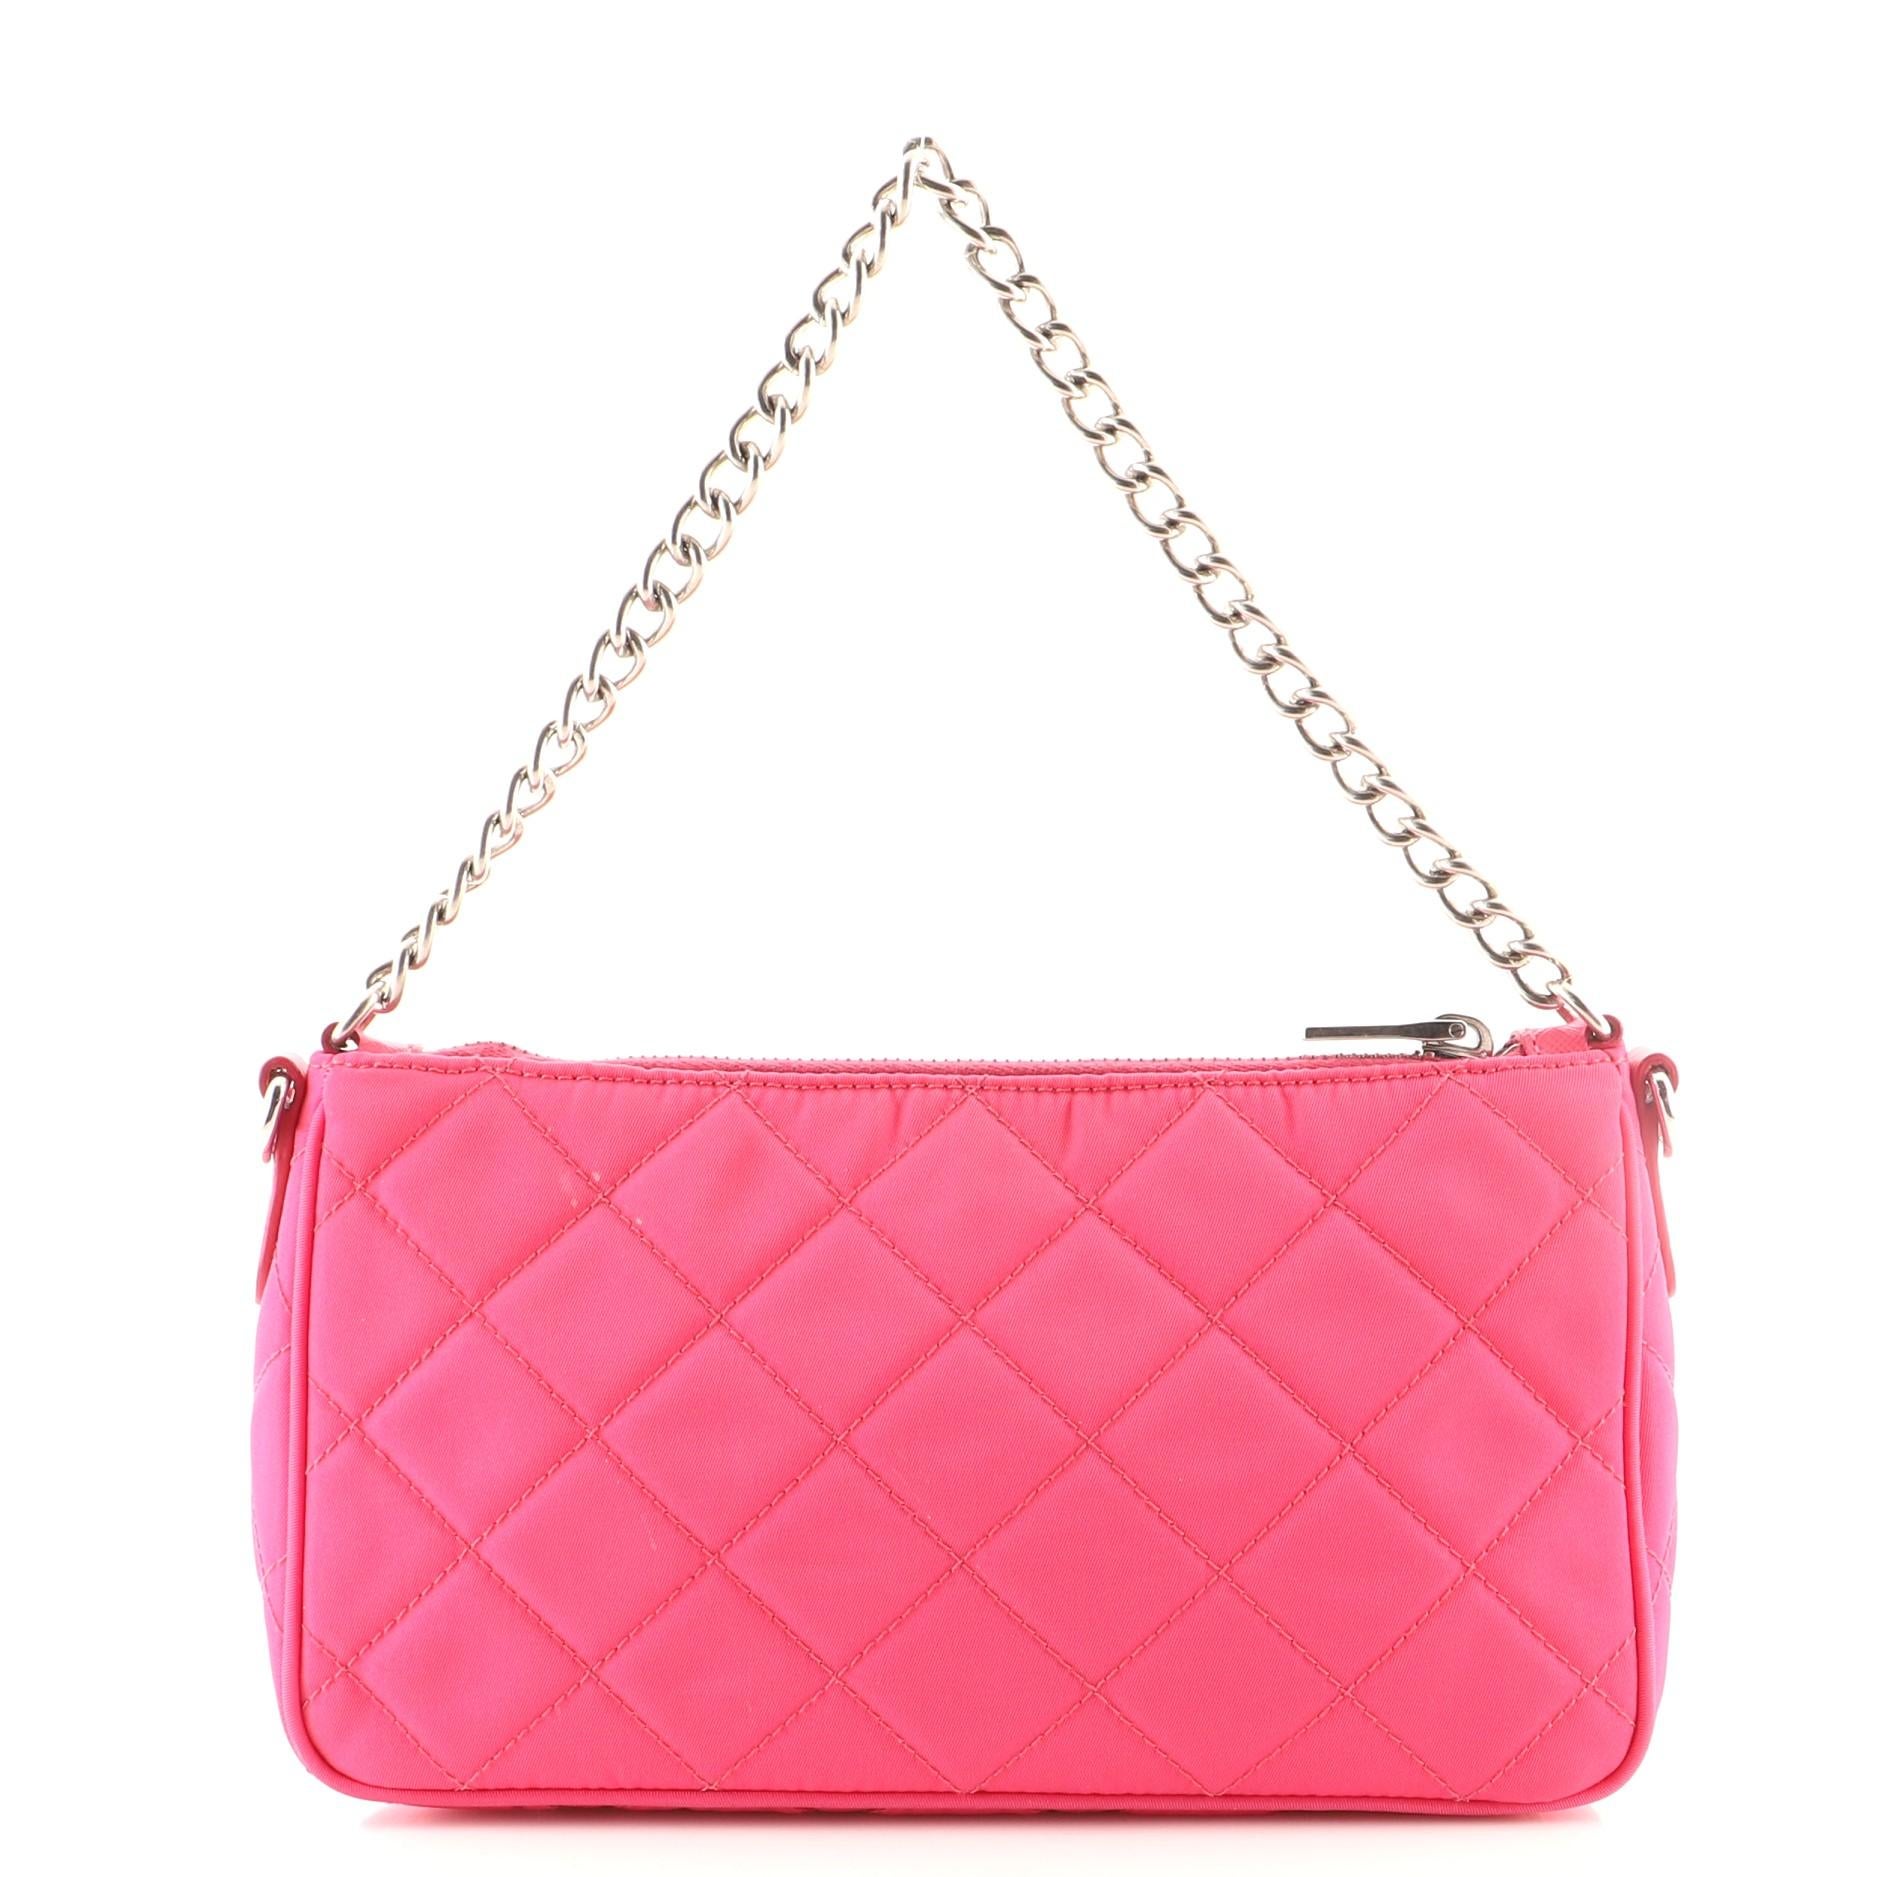 prada quilted bag with chain